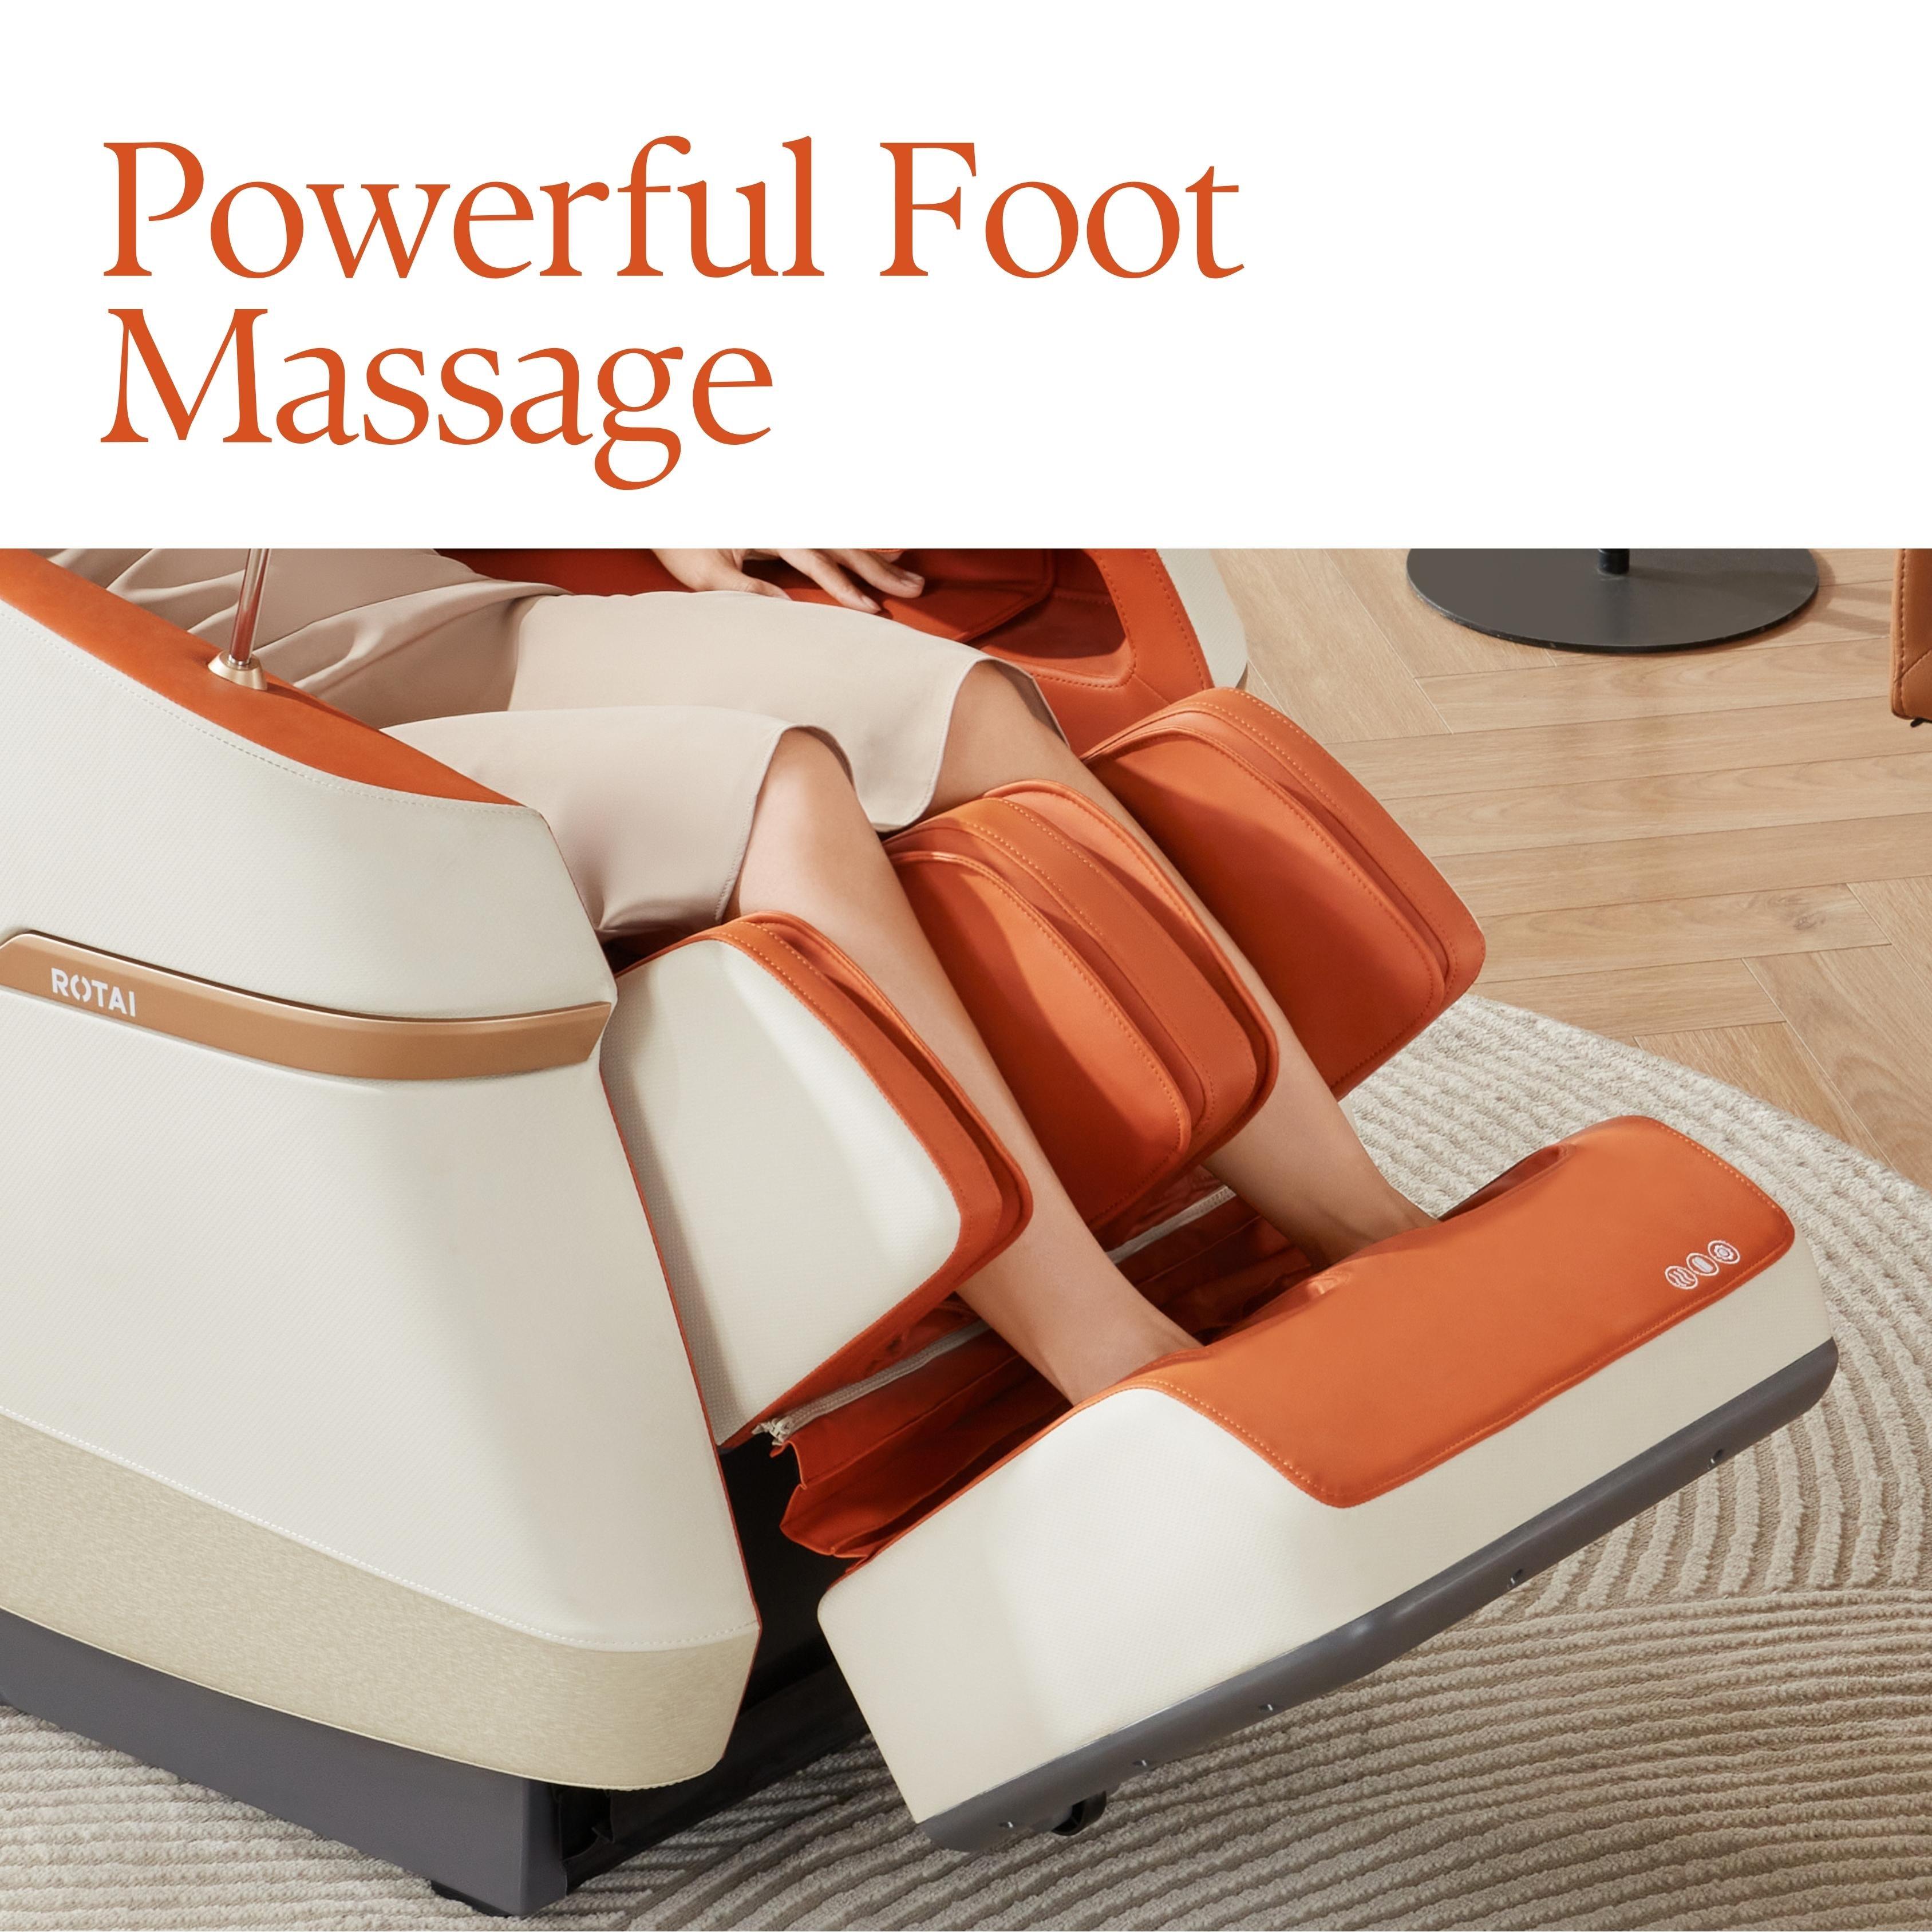 Blue Jimny massage chair providing powerful foot massage for ultimate relaxation in UAE massage chair shop.